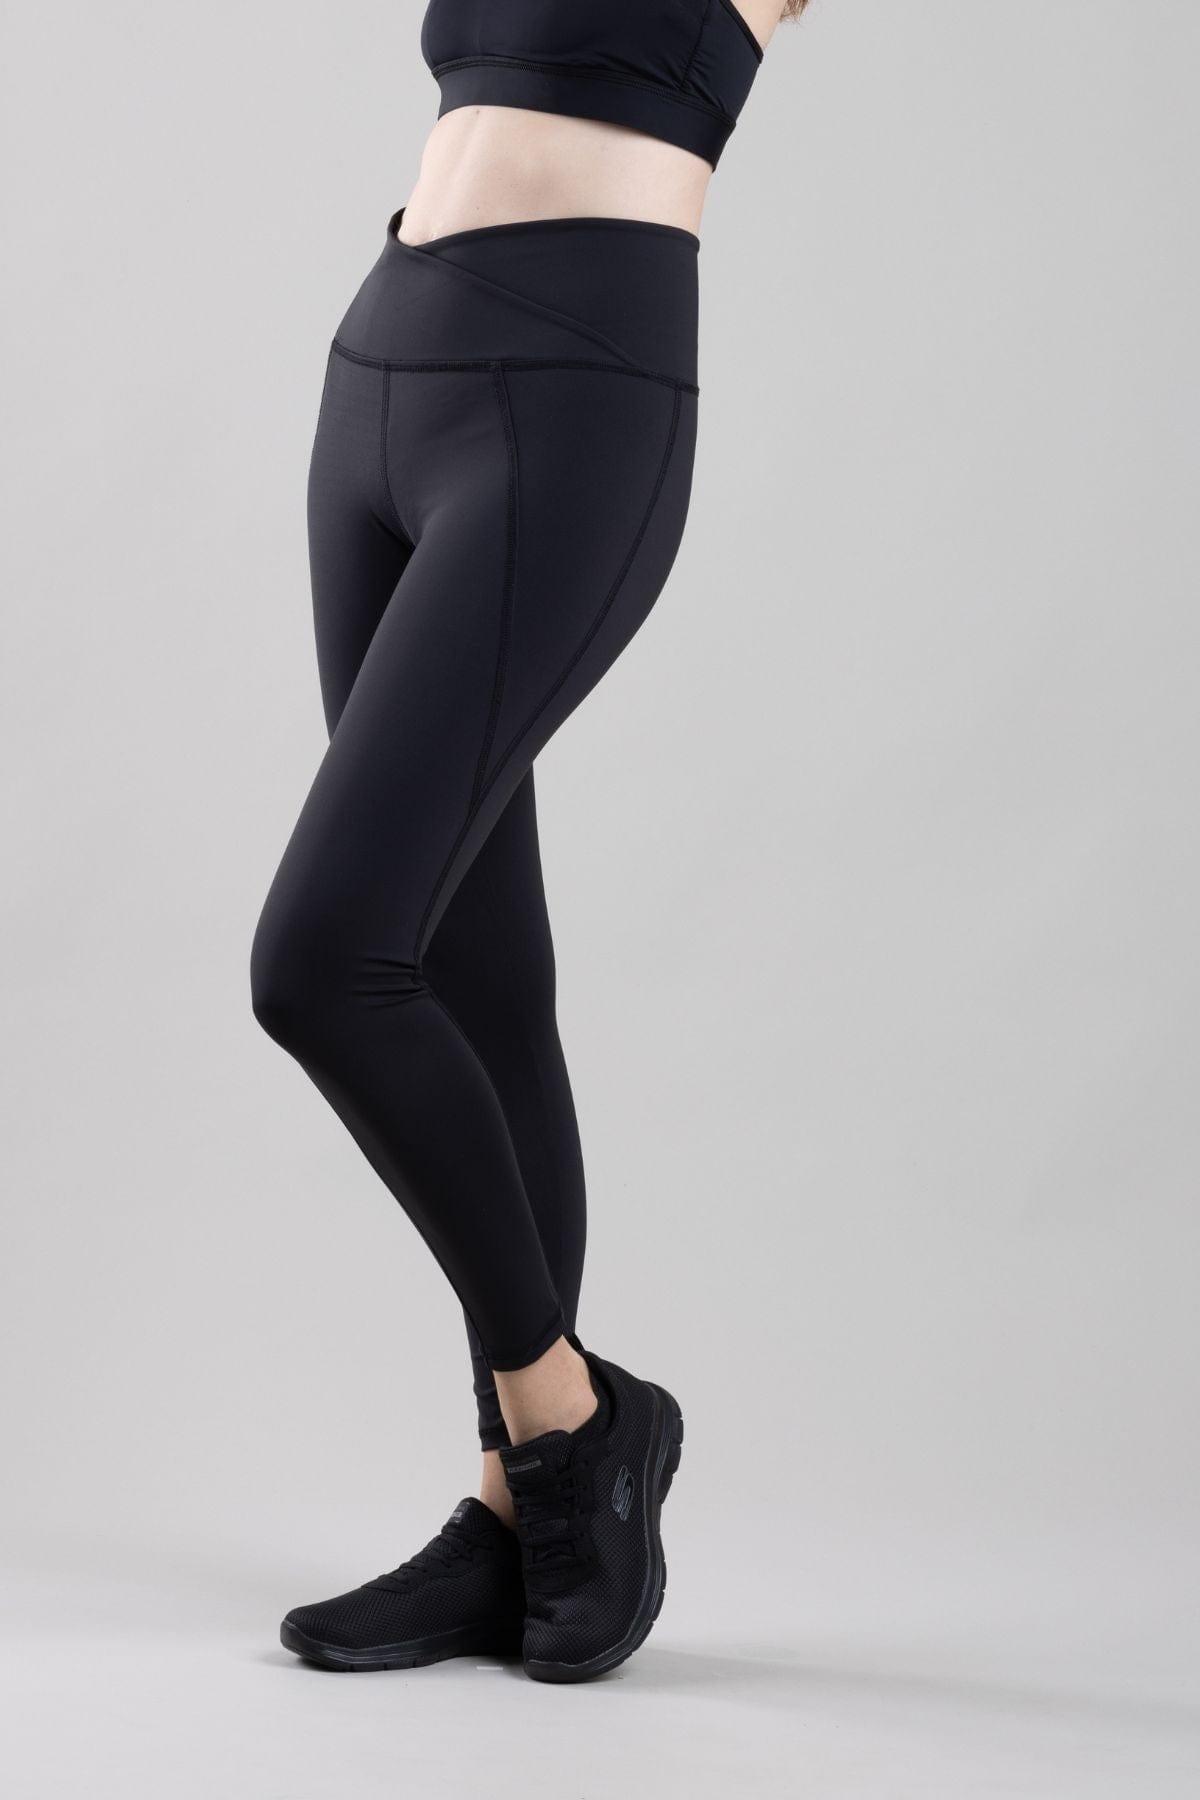 Active Maternity &amp; Postpartum Legging with Mesh Pocket in Black front view lower body